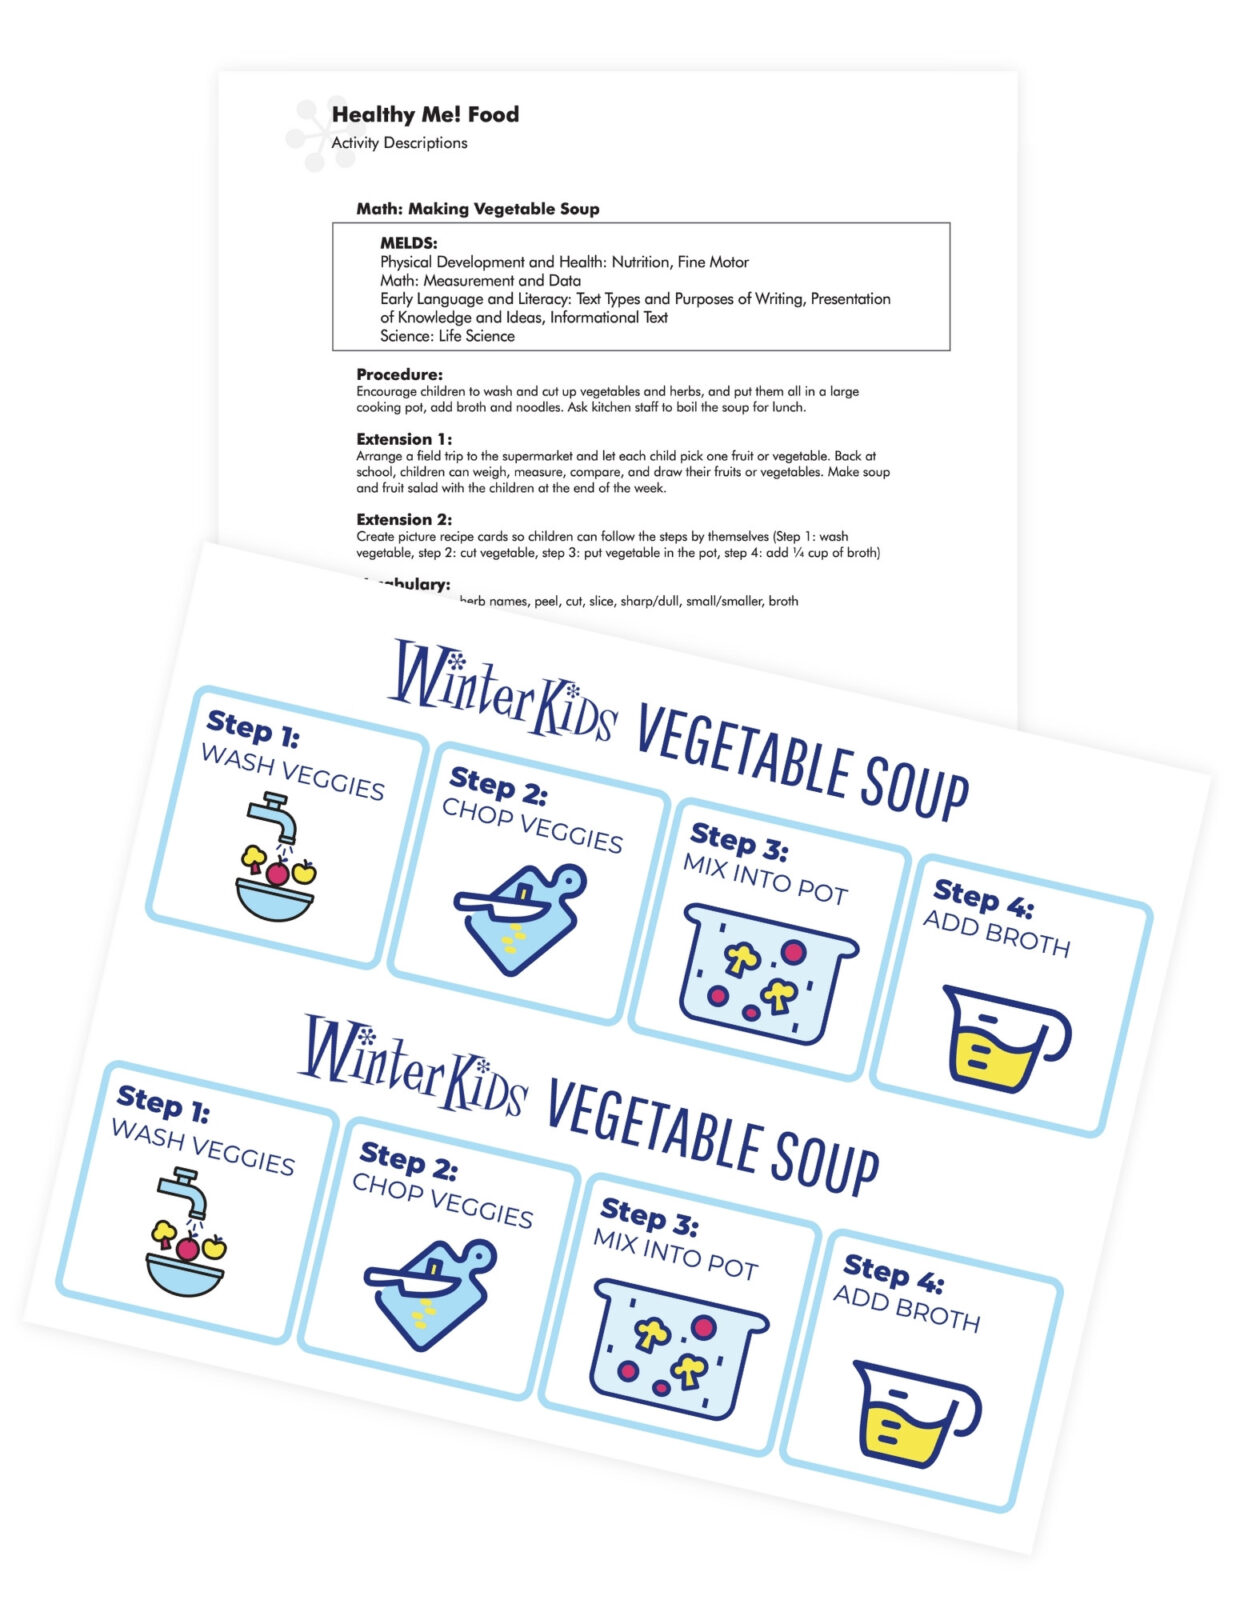 Vegetable Soup Recipe Printables Preview WinterKids Healthy Recipes